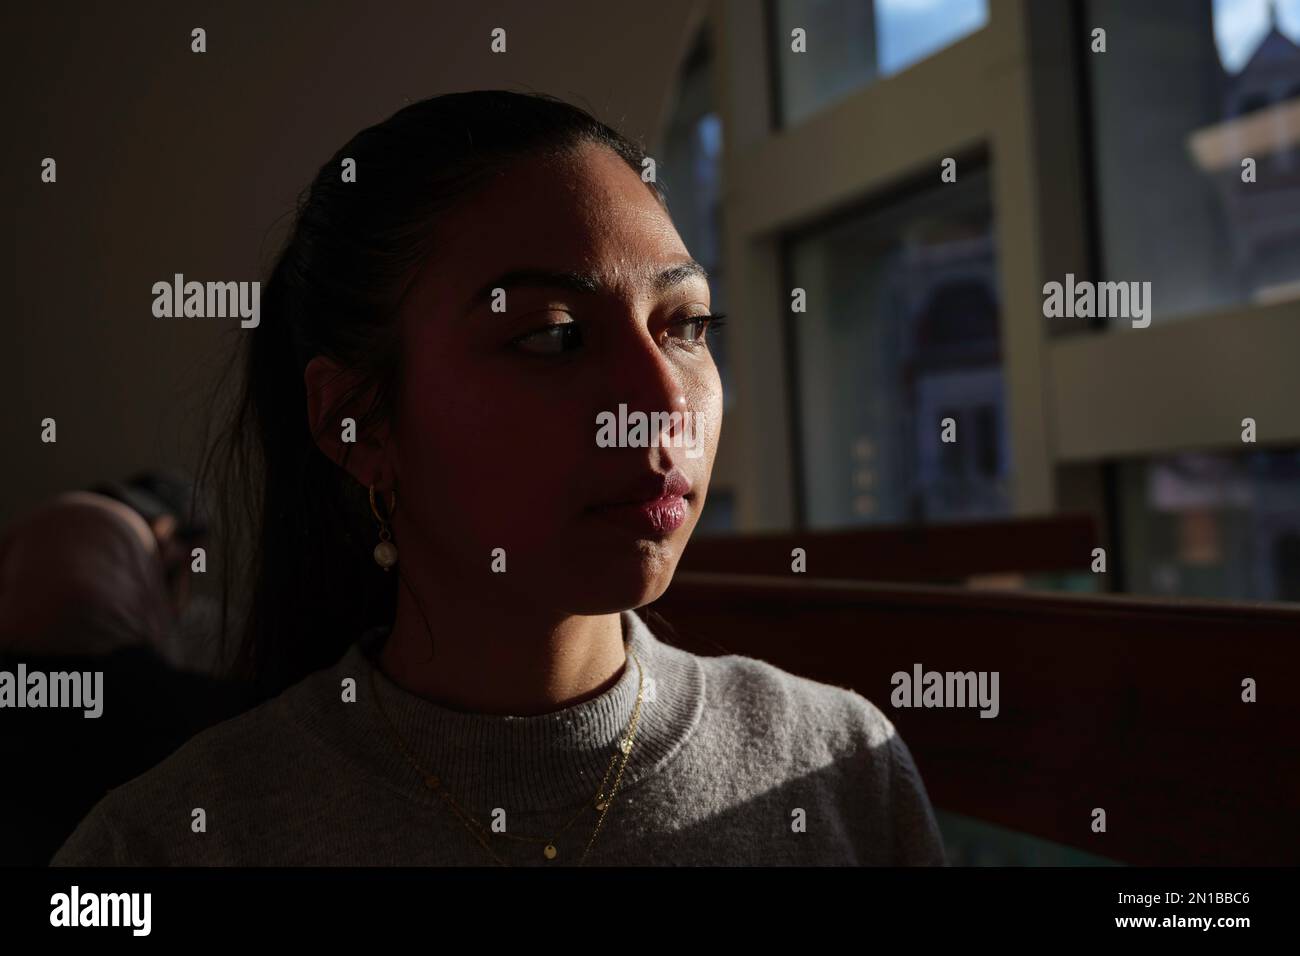 London - 03 06 2022: Portrait of girl with latin or south american features Stock Photo